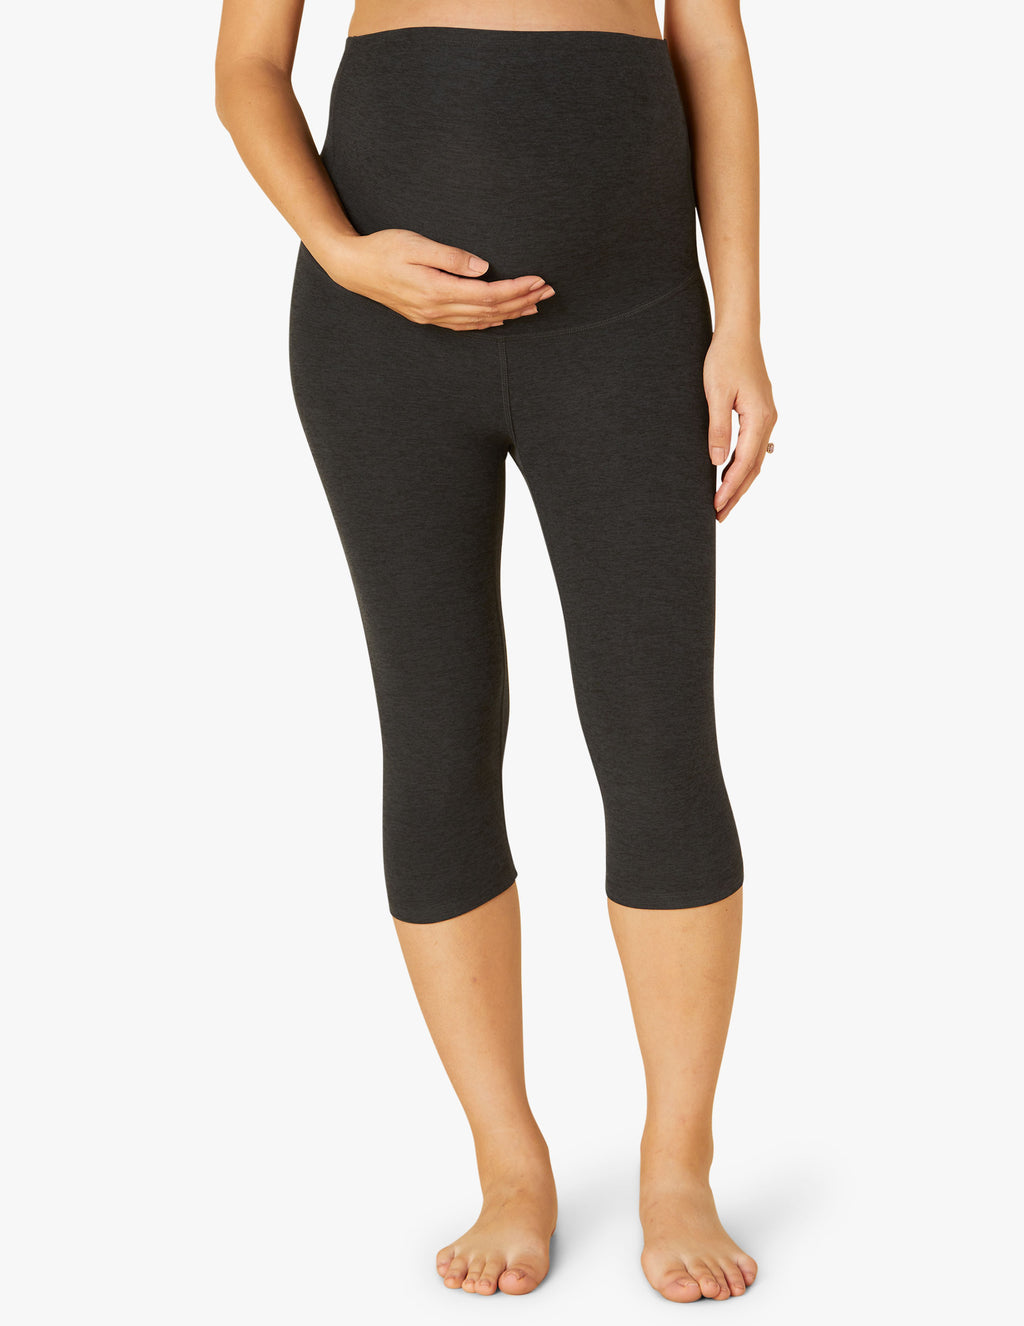 Spacedye Glow and Grow Maternity Pedal Pusher Legging Secondary Image